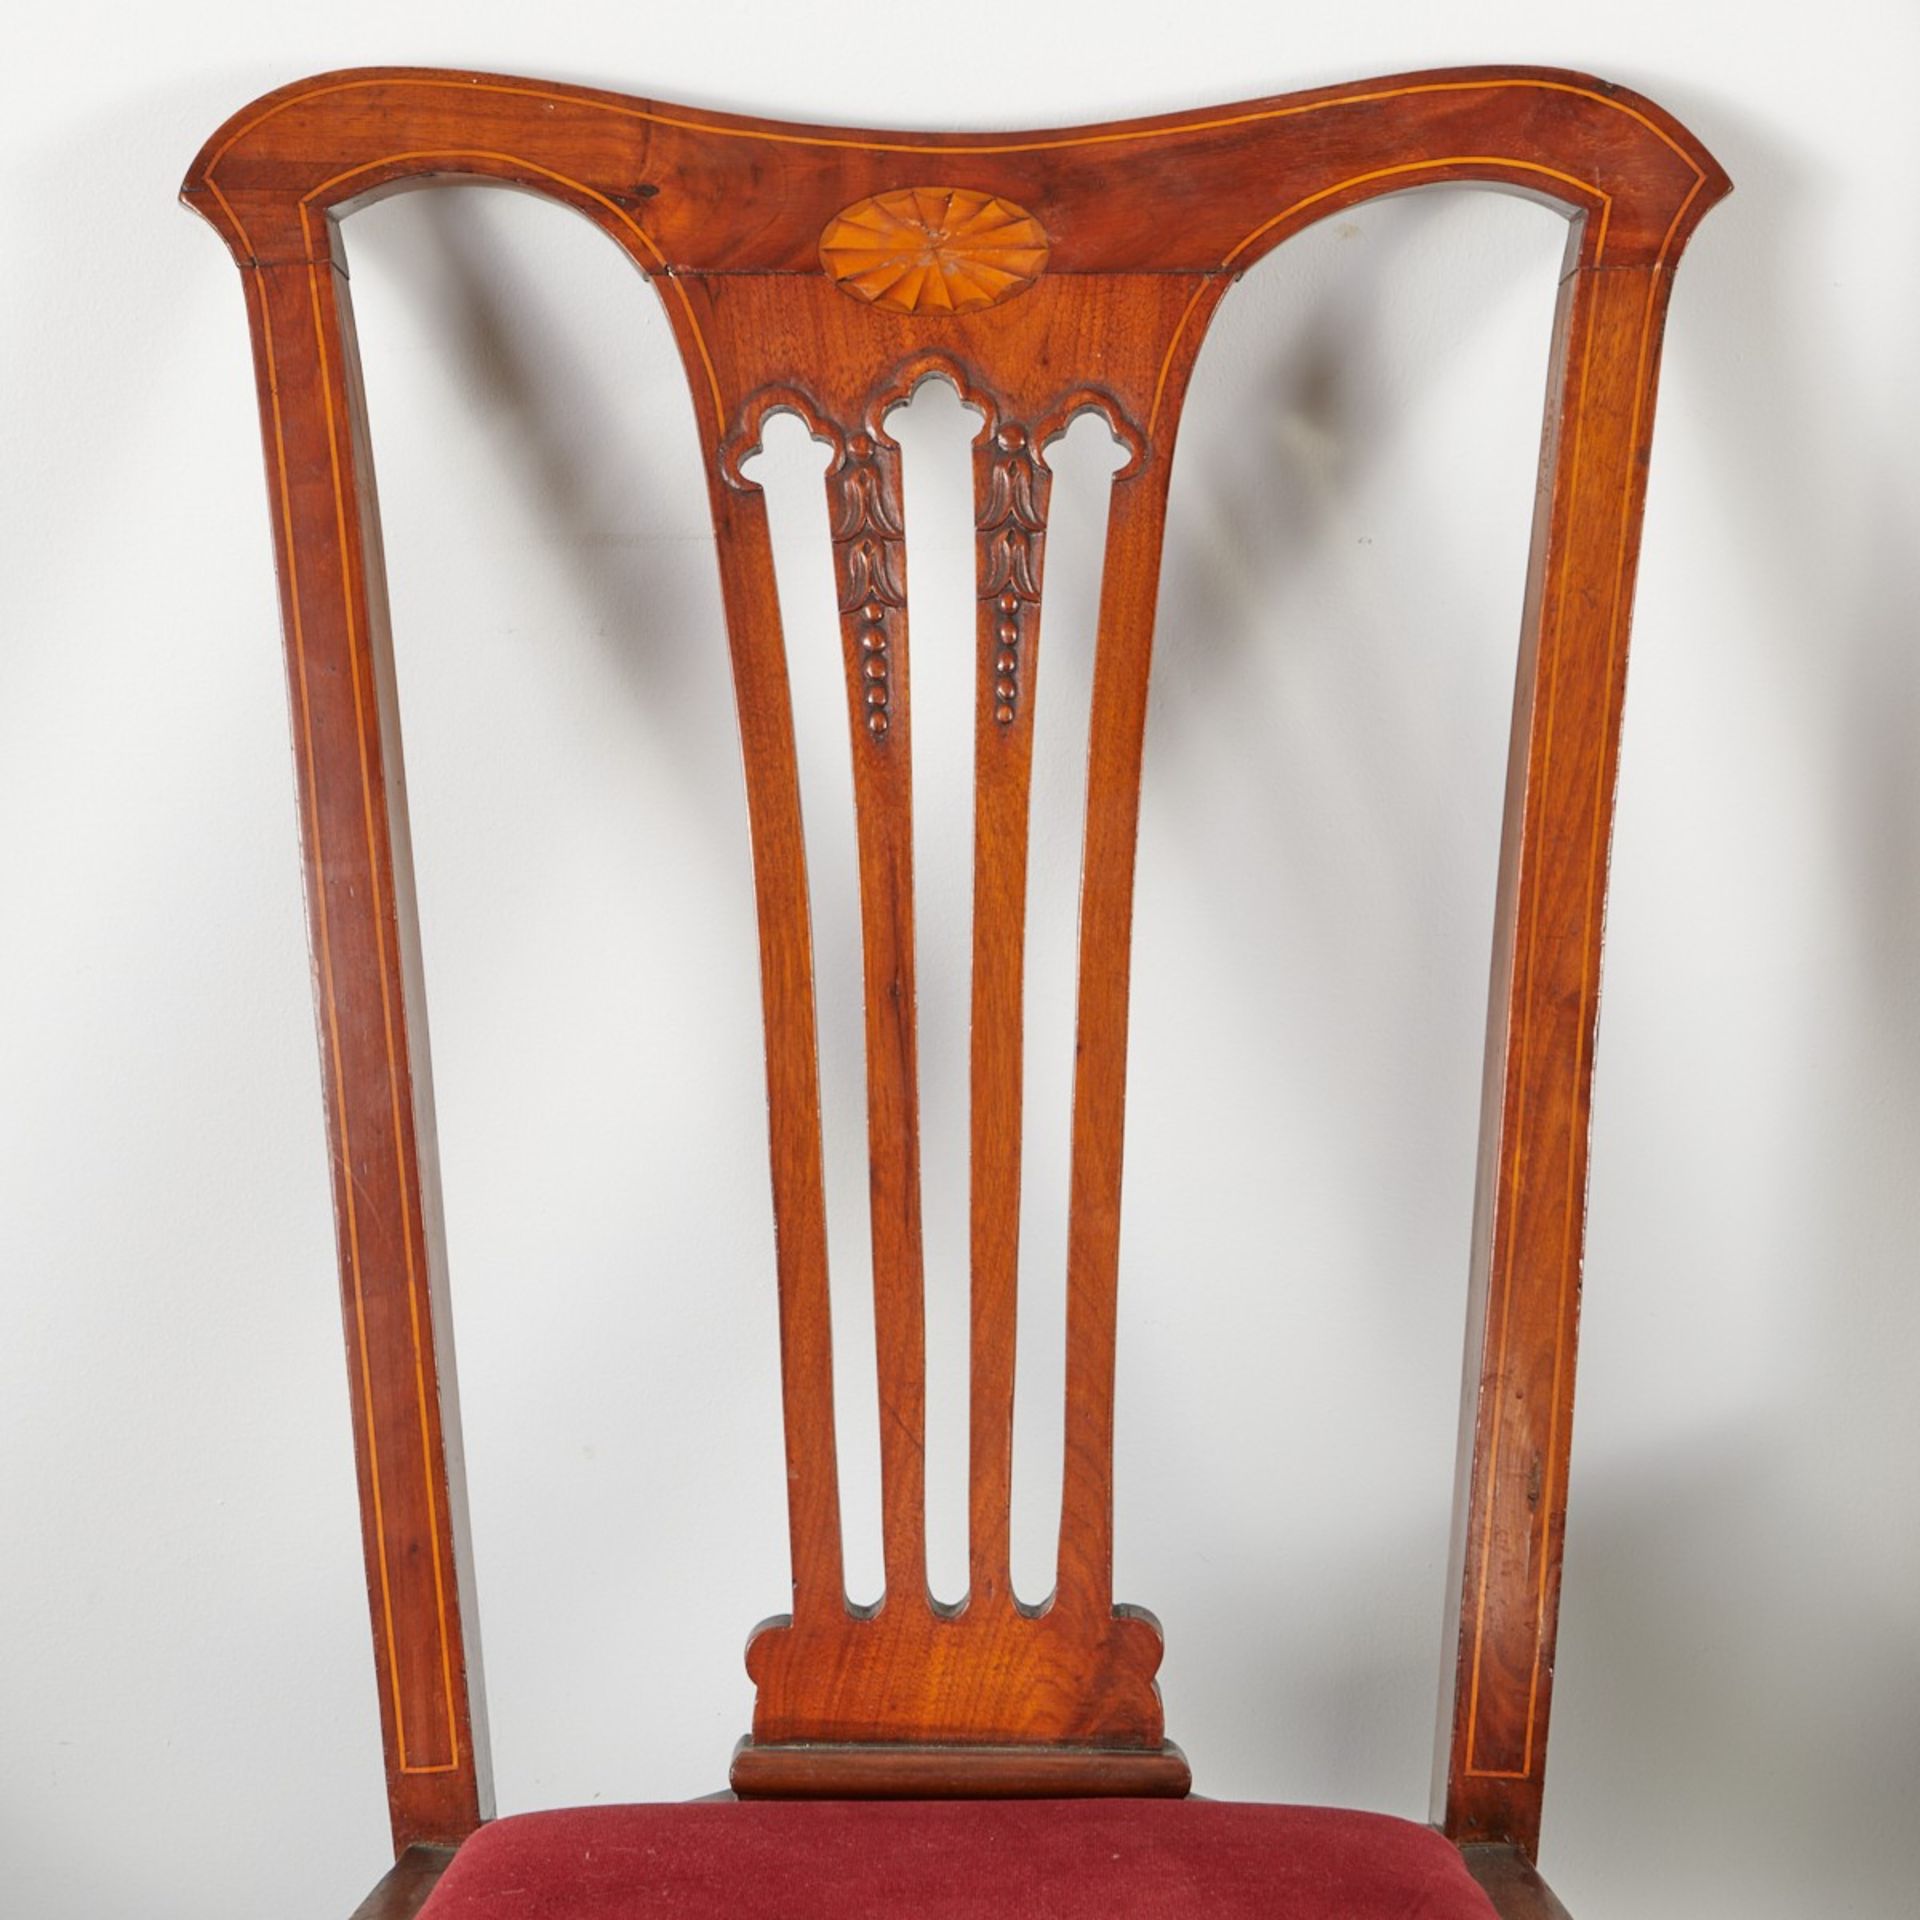 Set of 4 Federal Side Chairs - Image 7 of 8